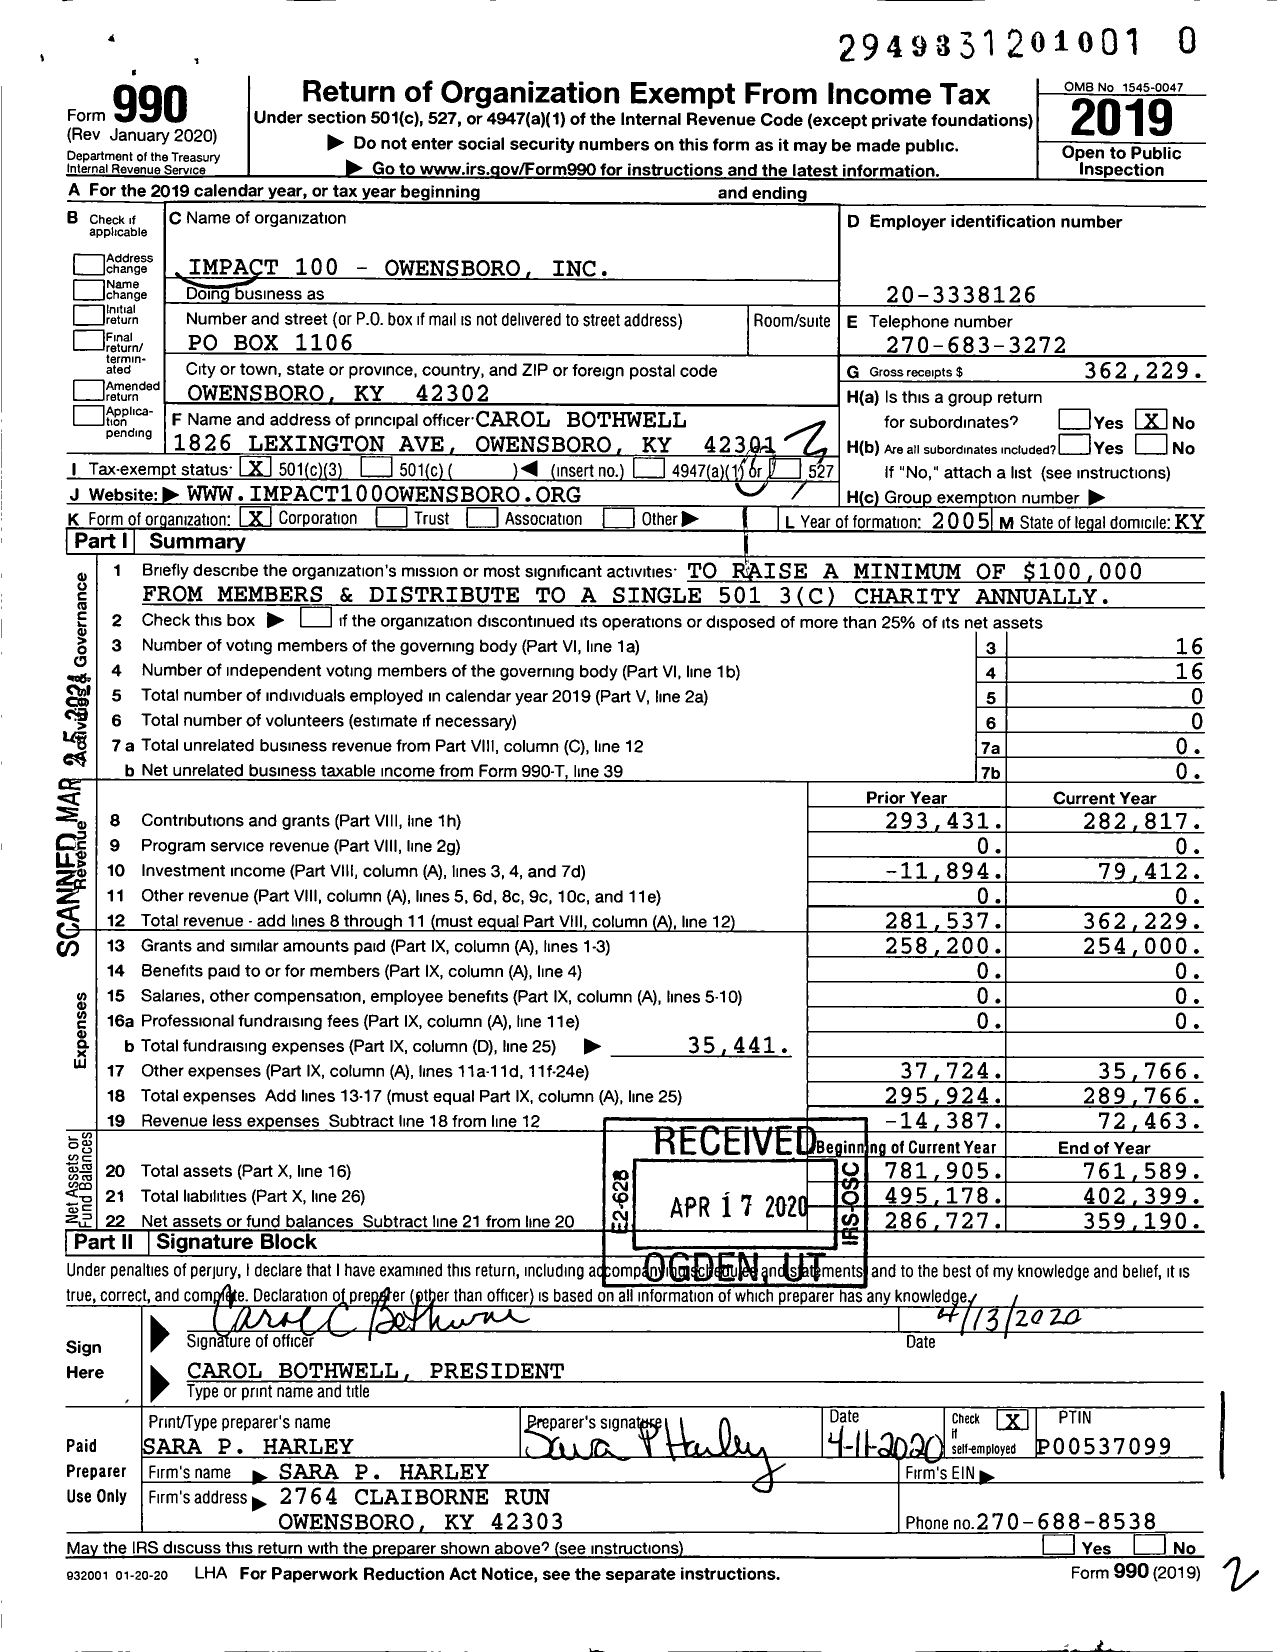 Image of first page of 2019 Form 990 for Impact 100 - Owensboro